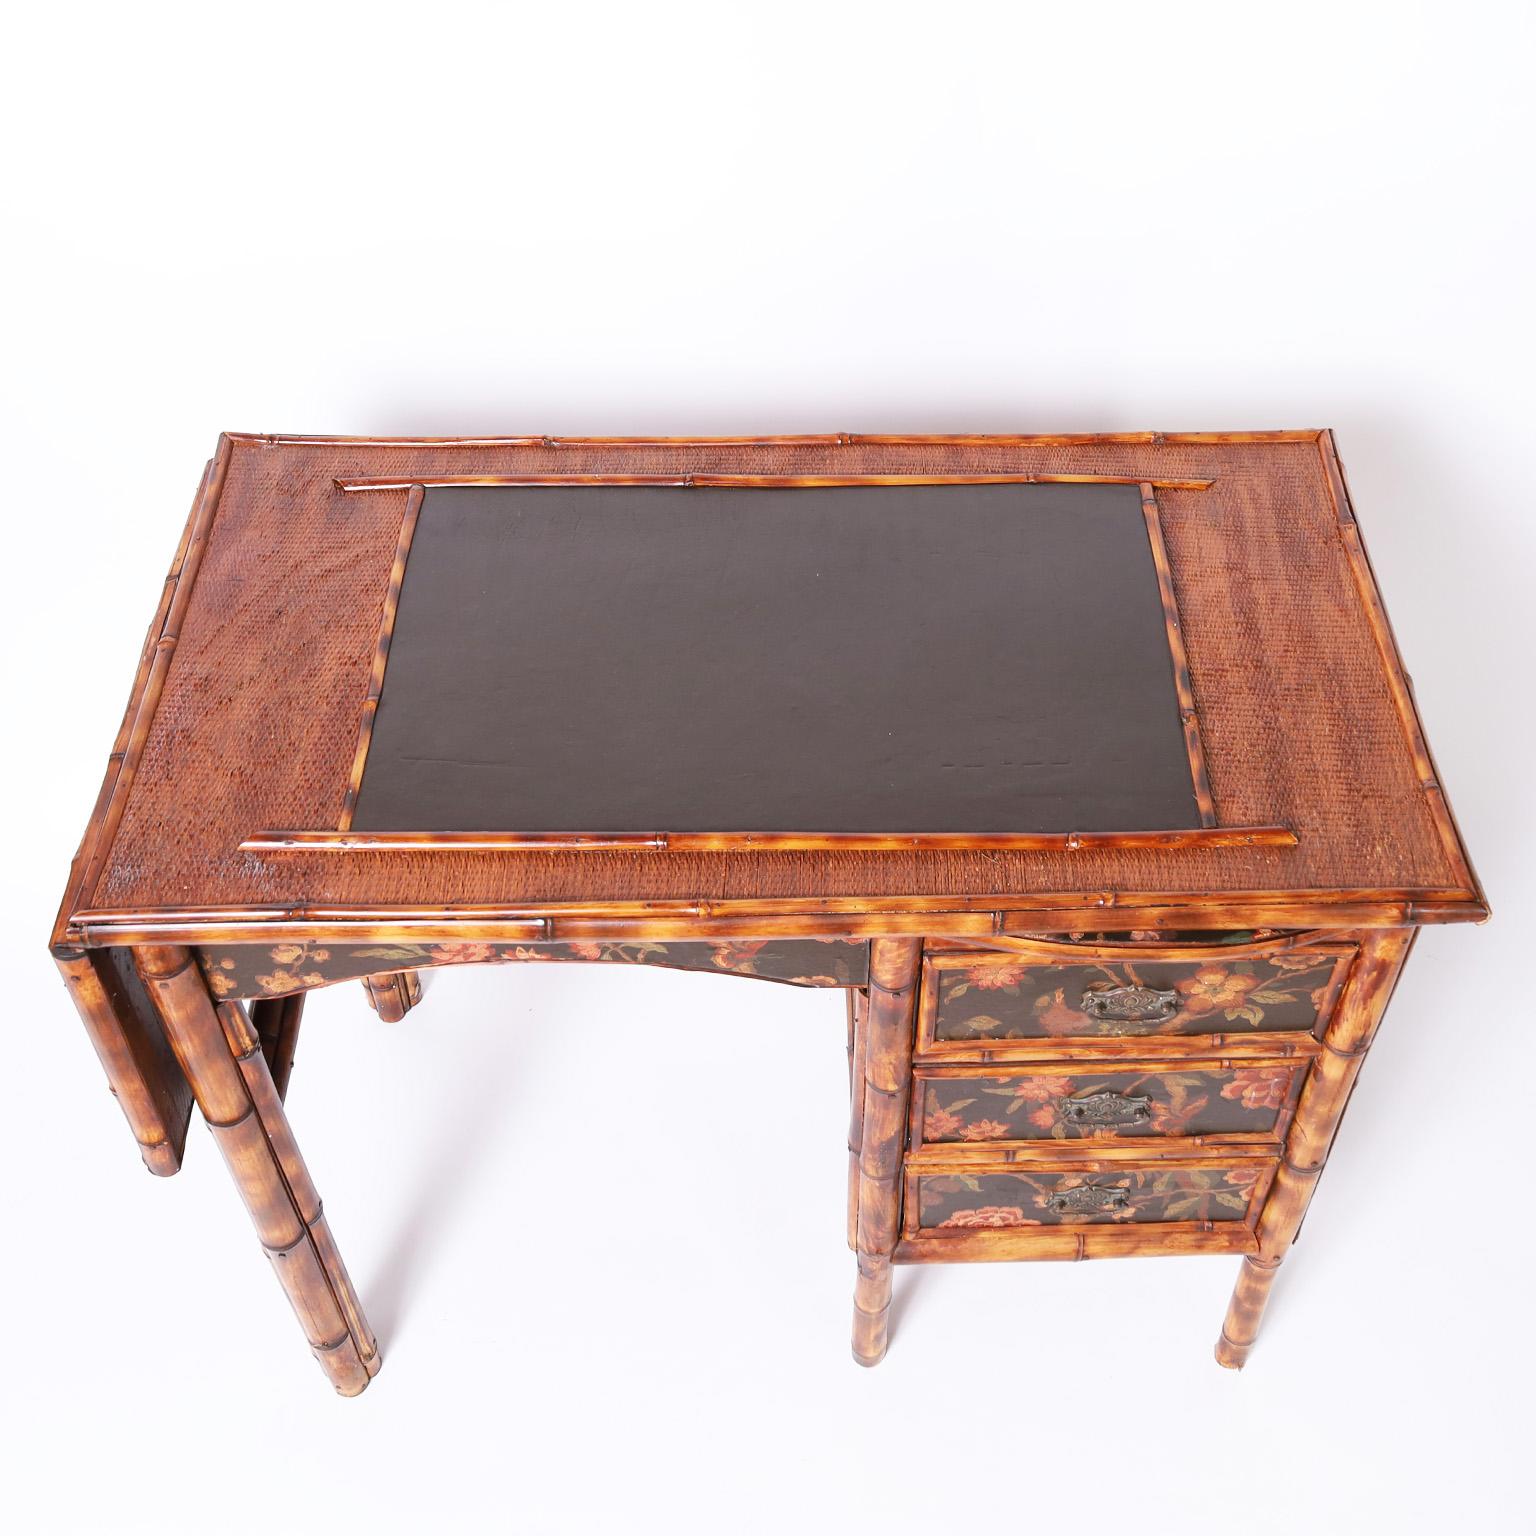 Victorian English Bamboo Desk or Writing Table For Sale